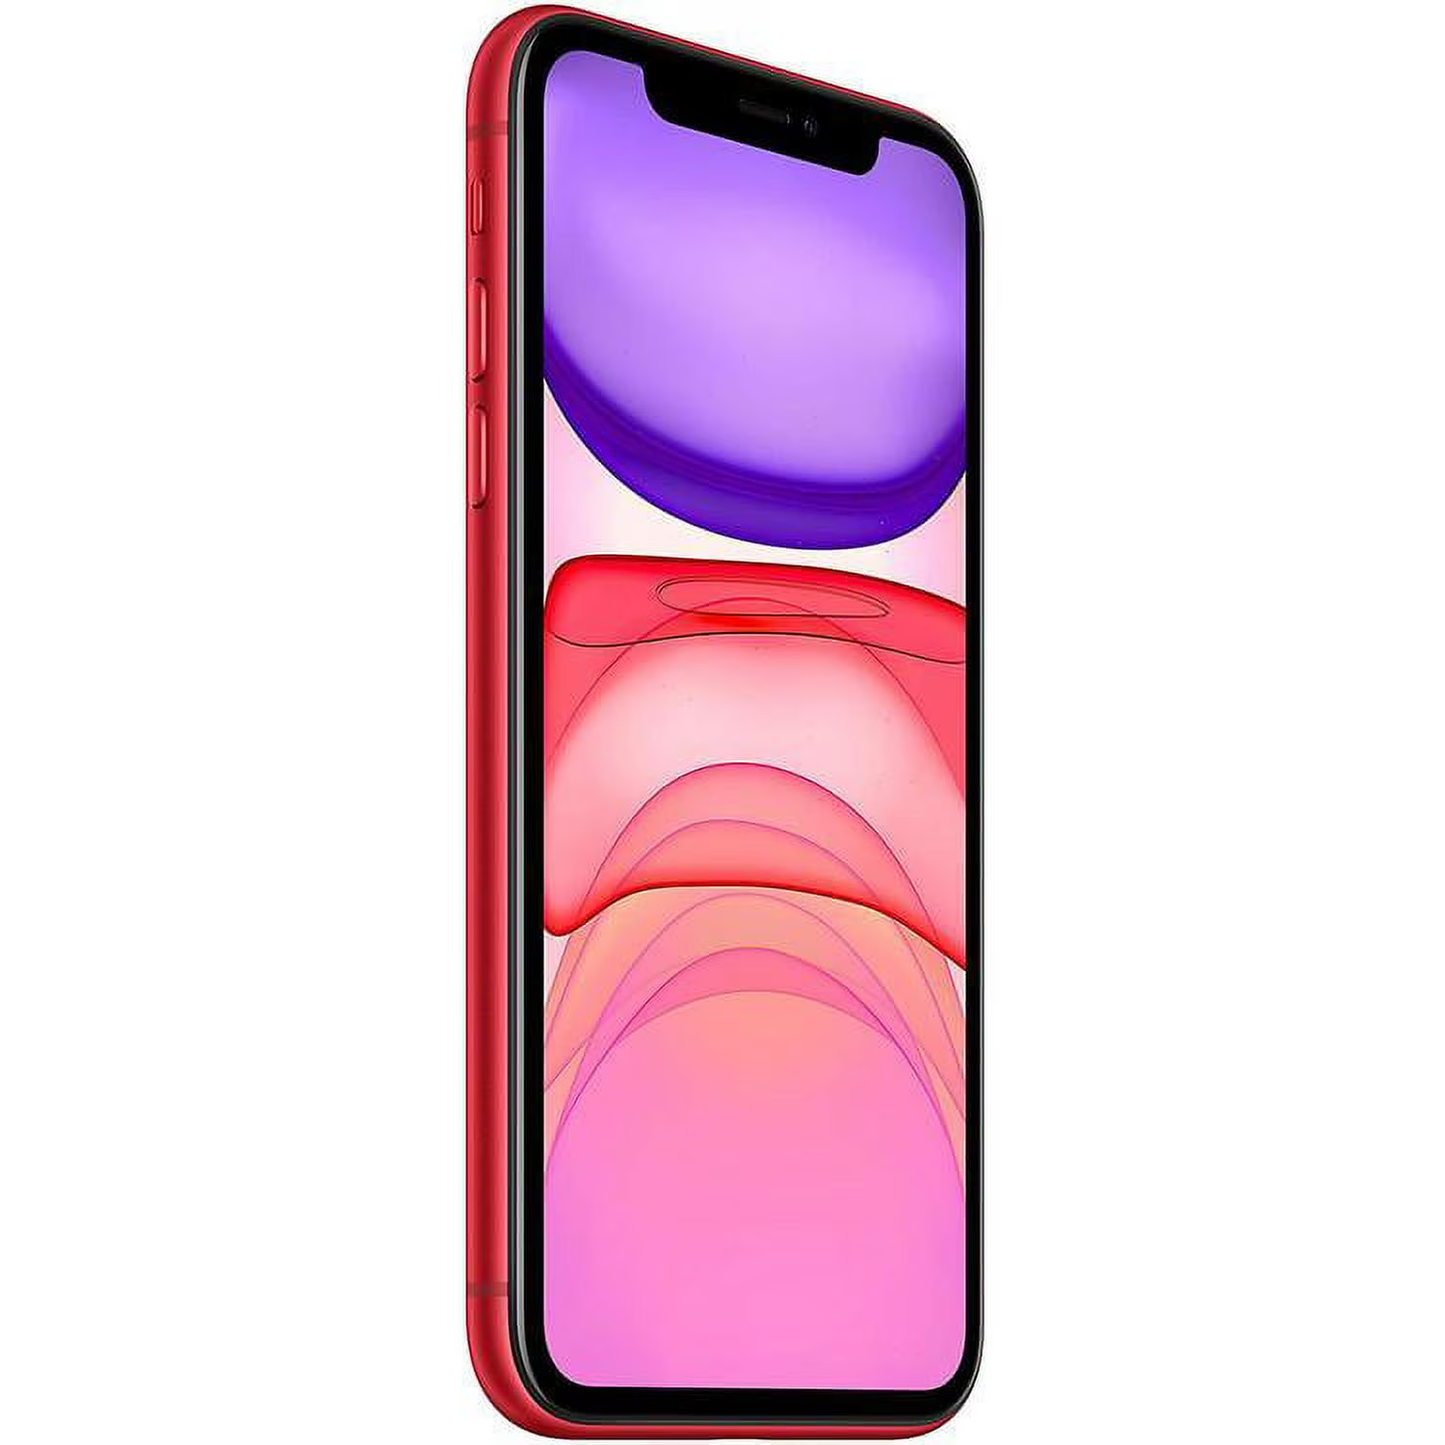 iPhone 11 (64gb) - RED